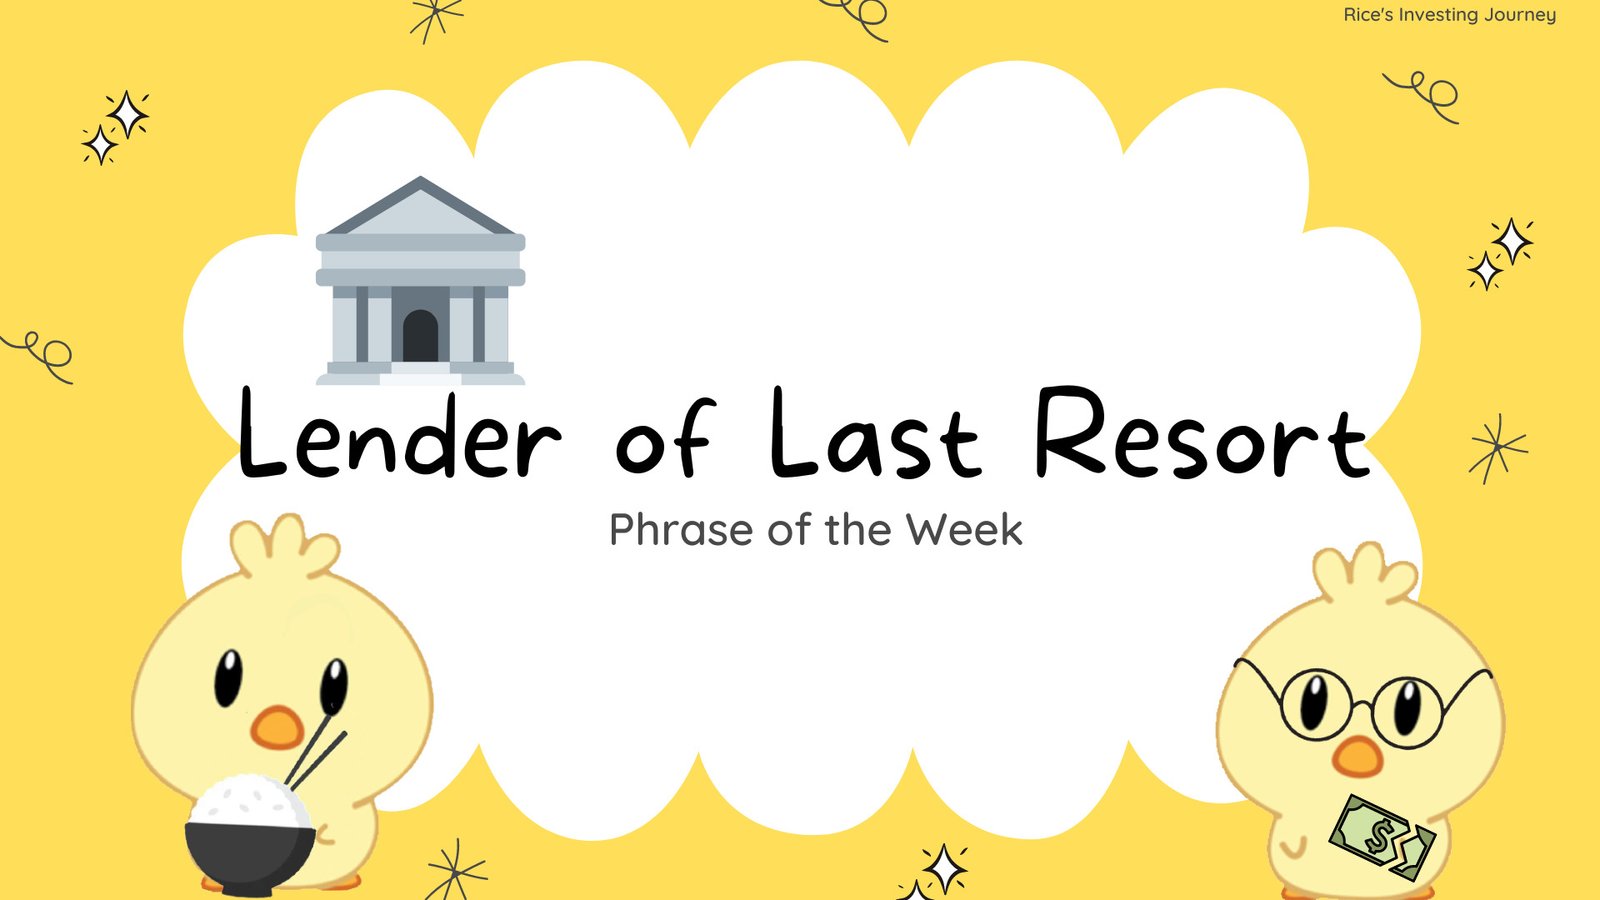 What is the Lender of Last Resort?